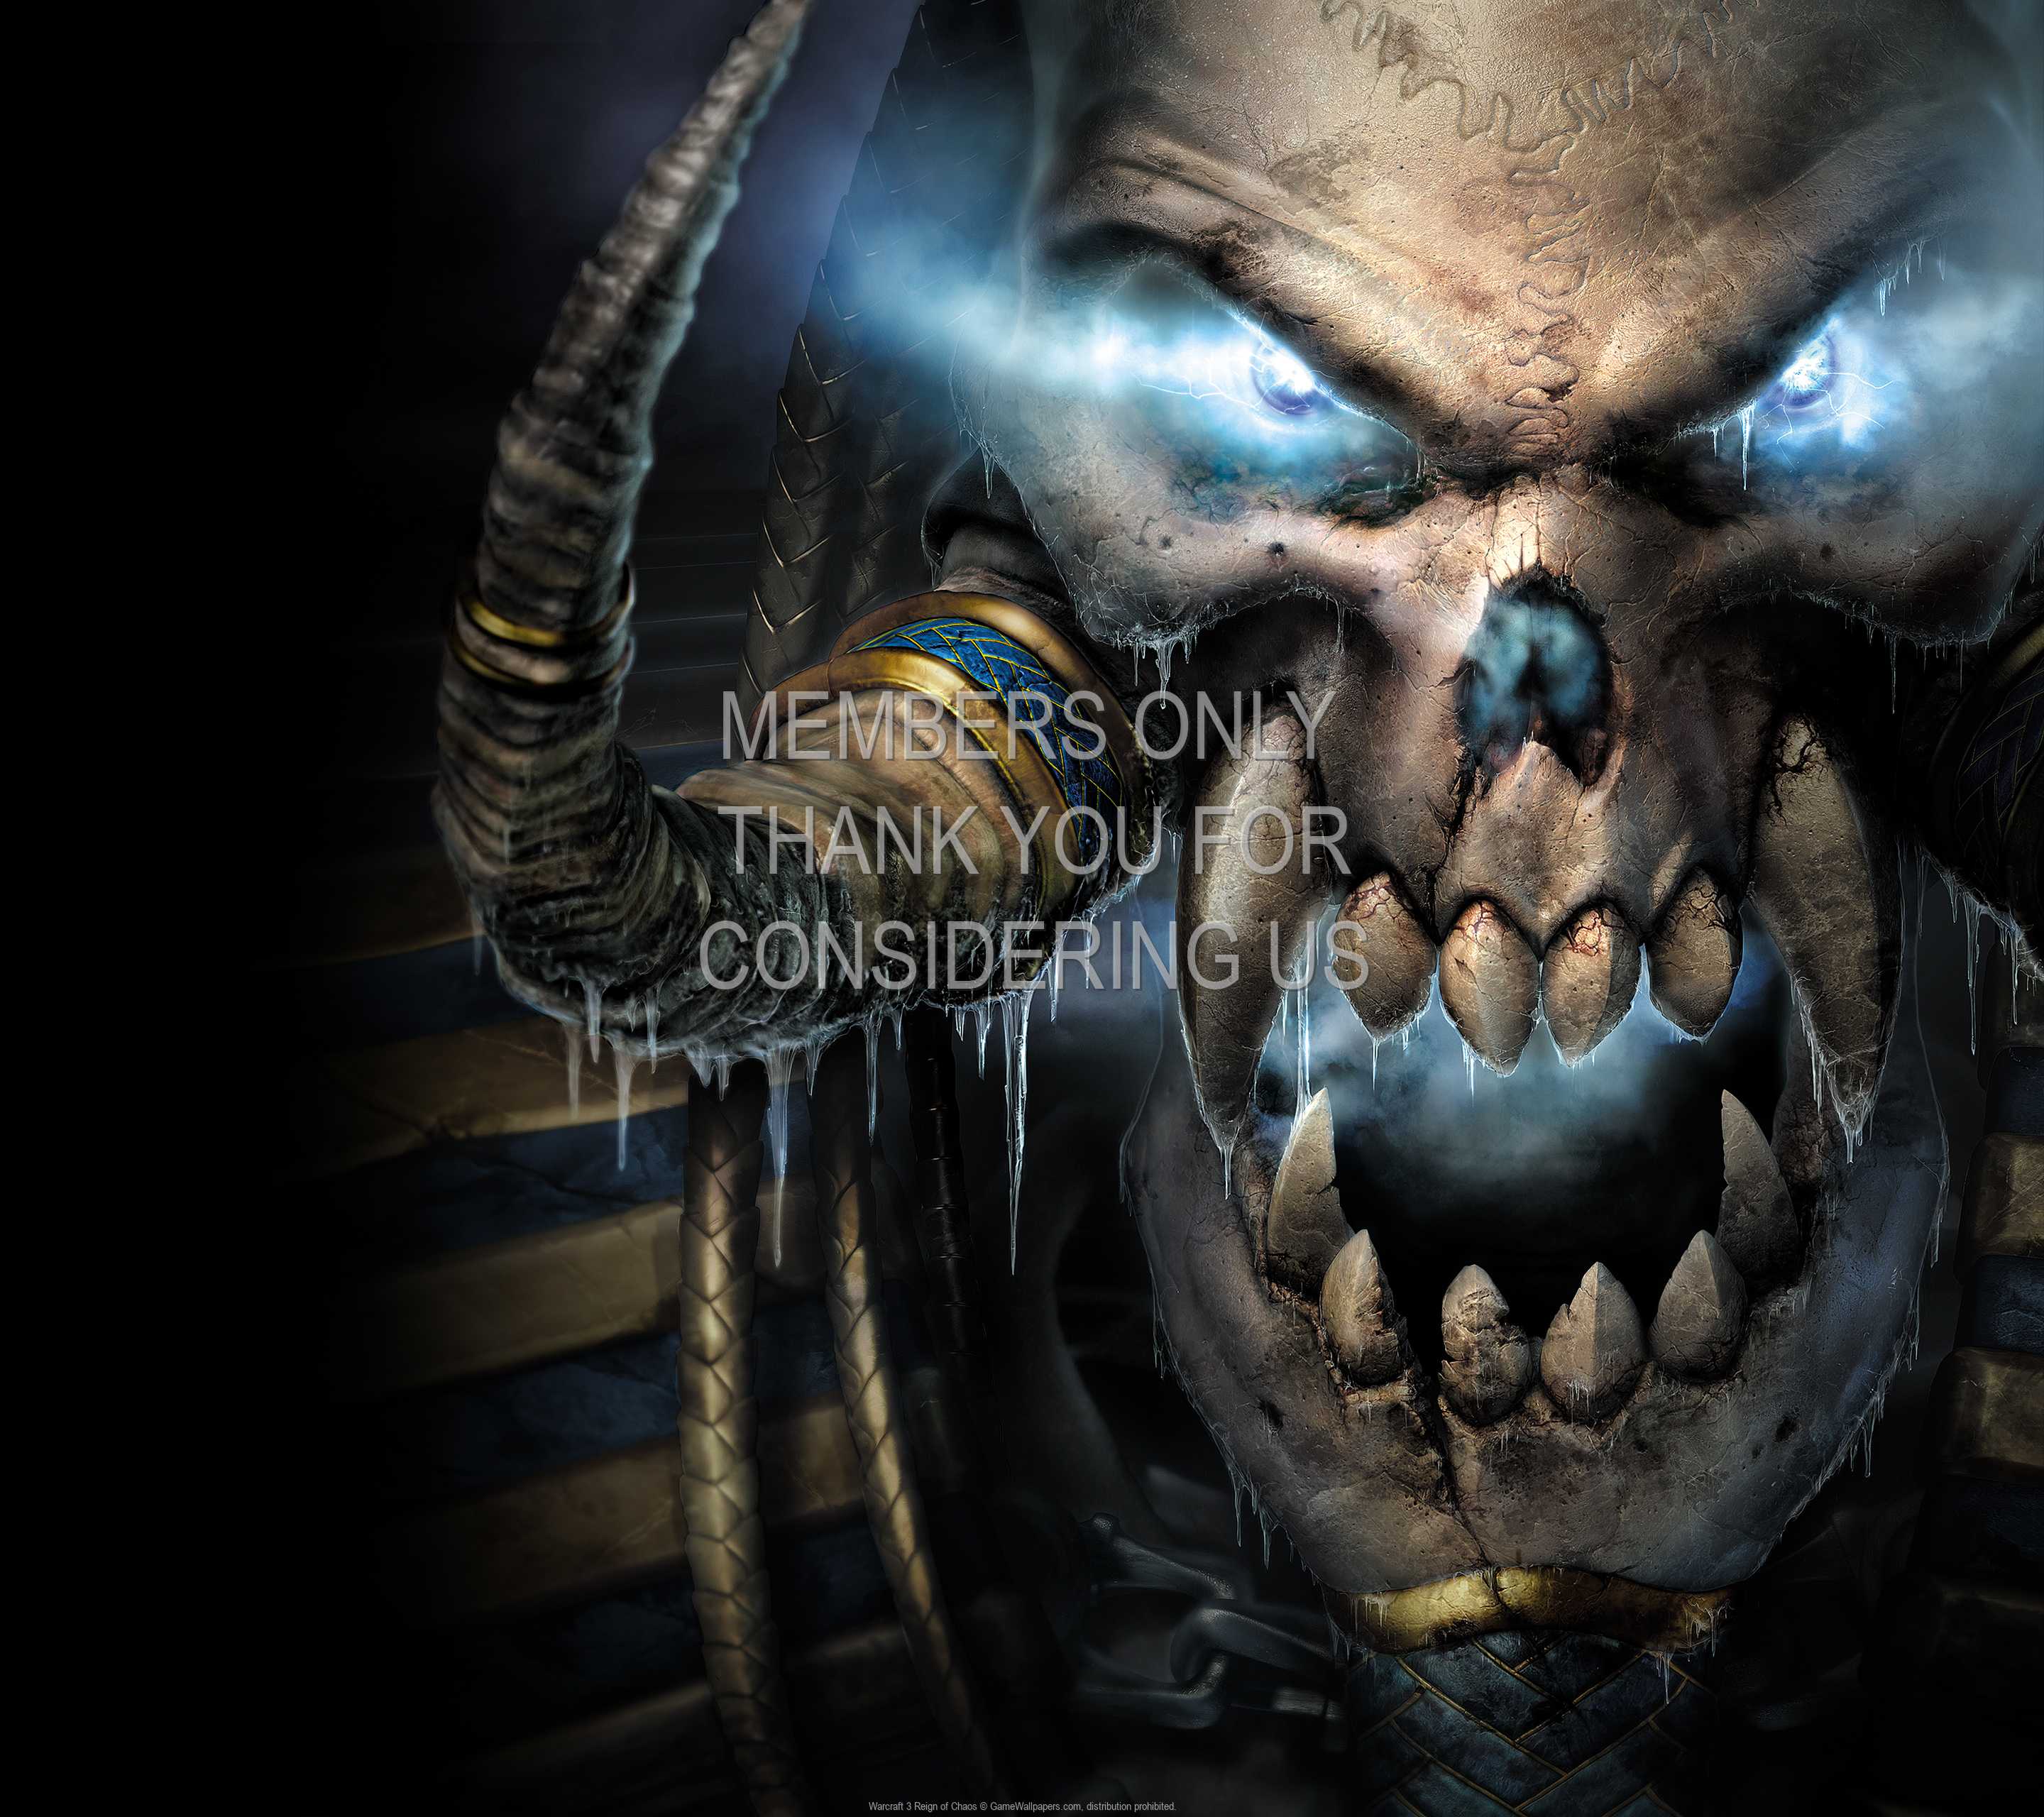 Warcraft 3: Reign of Chaos 1440p Horizontal Mobiele achtergrond 26